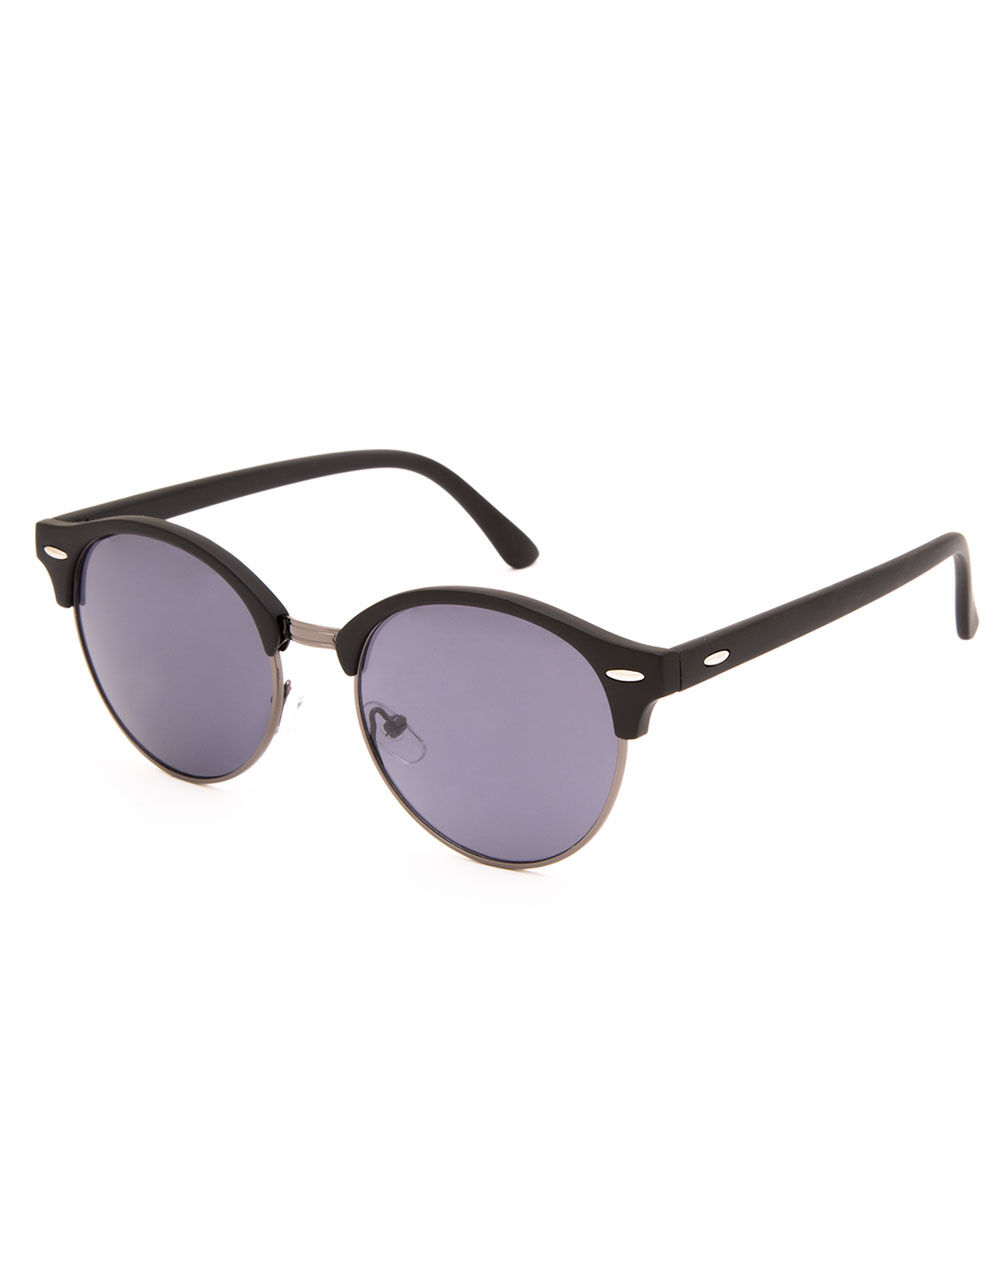 BLUE CROWN ELECTRIC CLUBMASTER SUNGLASSES